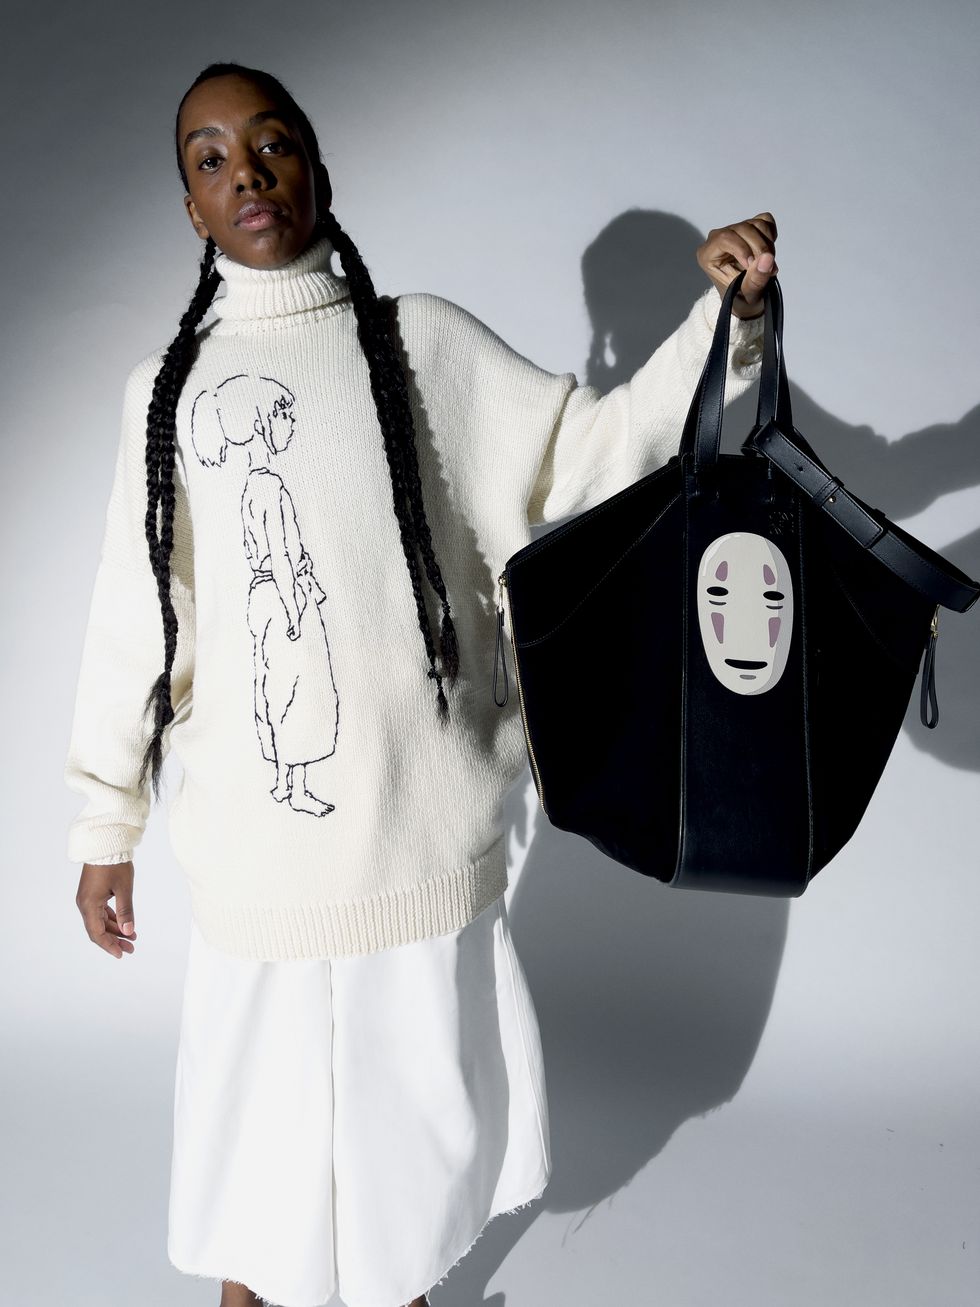 model wearing white sweater and pants holds up black tote bag